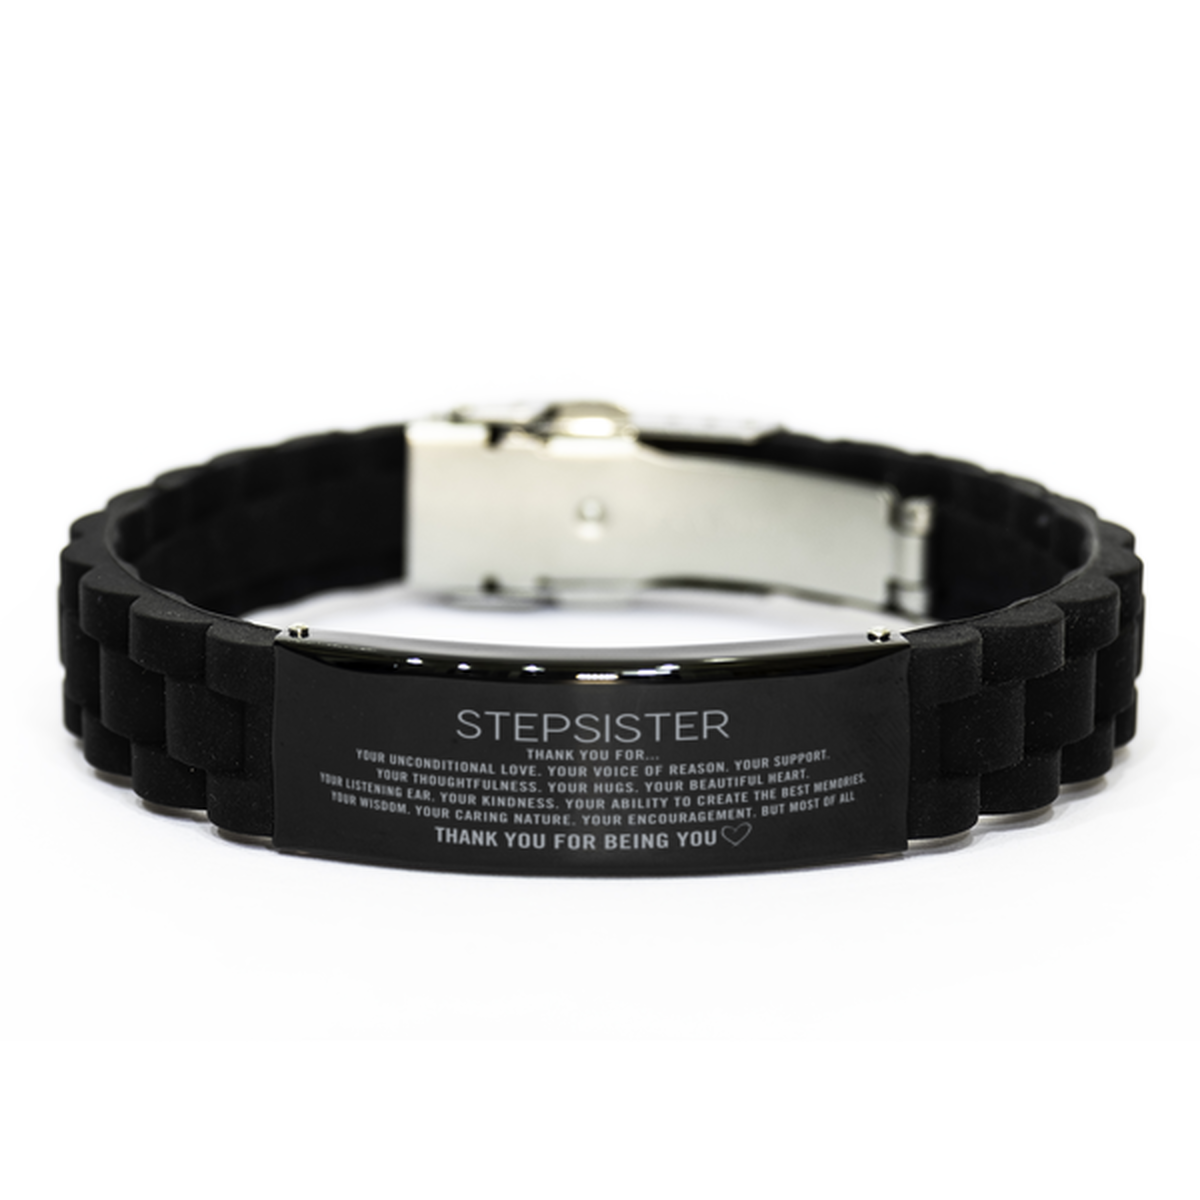 Stepsister Black Glidelock Clasp Bracelet Custom, Engraved Gifts For Stepsister Christmas Graduation Birthday Gifts for Men Women Stepsister Thank you for Your unconditional love